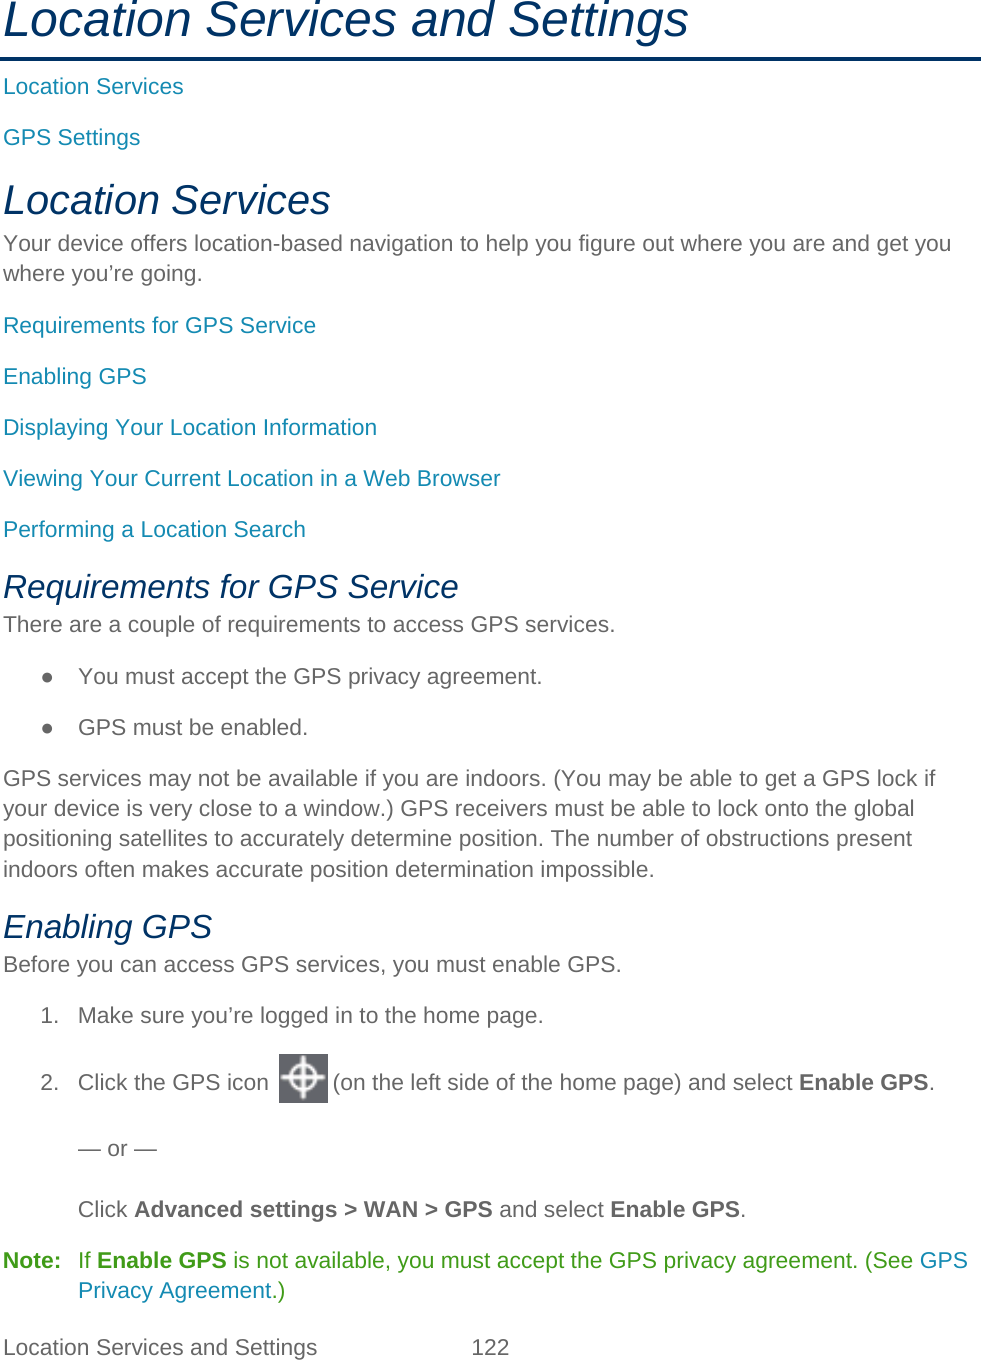 Location Services and Settings 122   Location Services and Settings Location Services GPS Settings Location Services Your device offers location-based navigation to help you figure out where you are and get you where you’re going. Requirements for GPS Service Enabling GPS Displaying Your Location Information Viewing Your Current Location in a Web Browser Performing a Location Search Requirements for GPS Service There are a couple of requirements to access GPS services. ● You must accept the GPS privacy agreement. ● GPS must be enabled. GPS services may not be available if you are indoors. (You may be able to get a GPS lock if your device is very close to a window.) GPS receivers must be able to lock onto the global positioning satellites to accurately determine position. The number of obstructions present indoors often makes accurate position determination impossible. Enabling GPS Before you can access GPS services, you must enable GPS. 1. Make sure you’re logged in to the home page. 2. Click the GPS icon   (on the left side of the home page) and select Enable GPS.  — or —  Click Advanced settings &gt; WAN &gt; GPS and select Enable GPS. Note:   If Enable GPS is not available, you must accept the GPS privacy agreement. (See GPS Privacy Agreement.) 